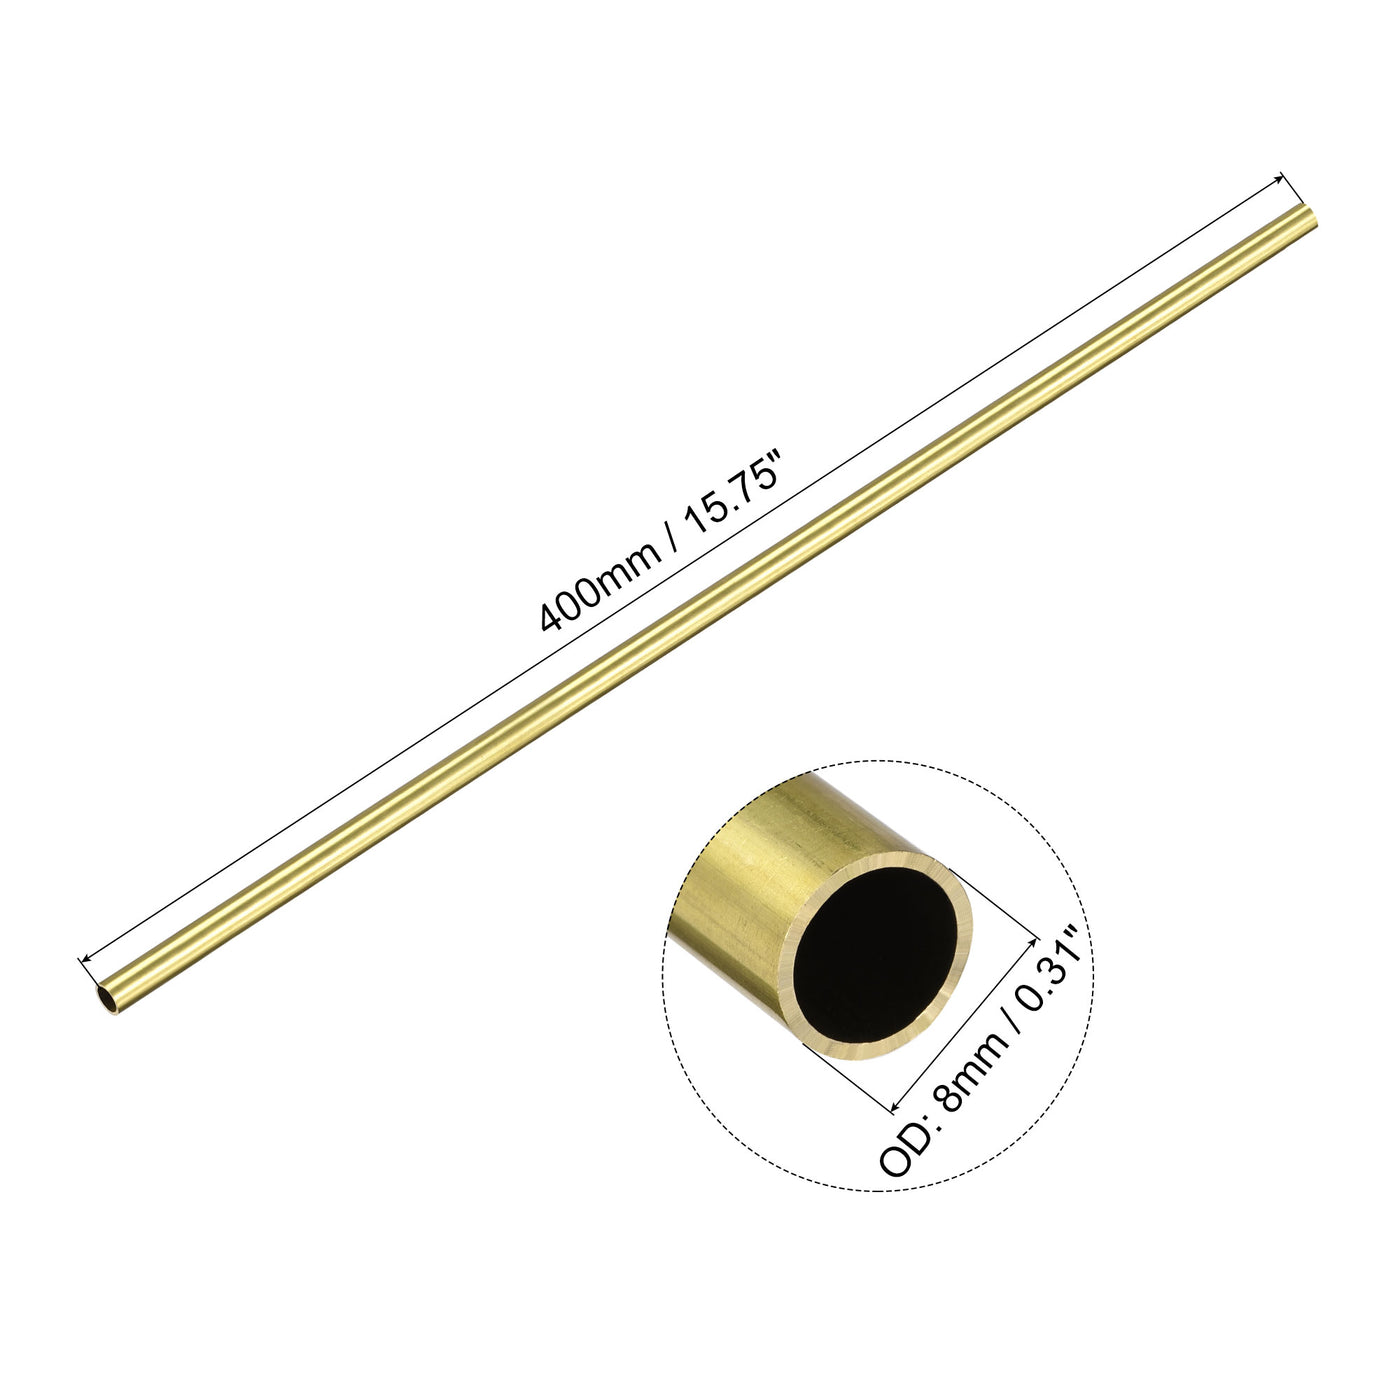 uxcell Uxcell 8mm x 1mm x 400mm Seamless Straight Brass Tube for Industry DIY Projects